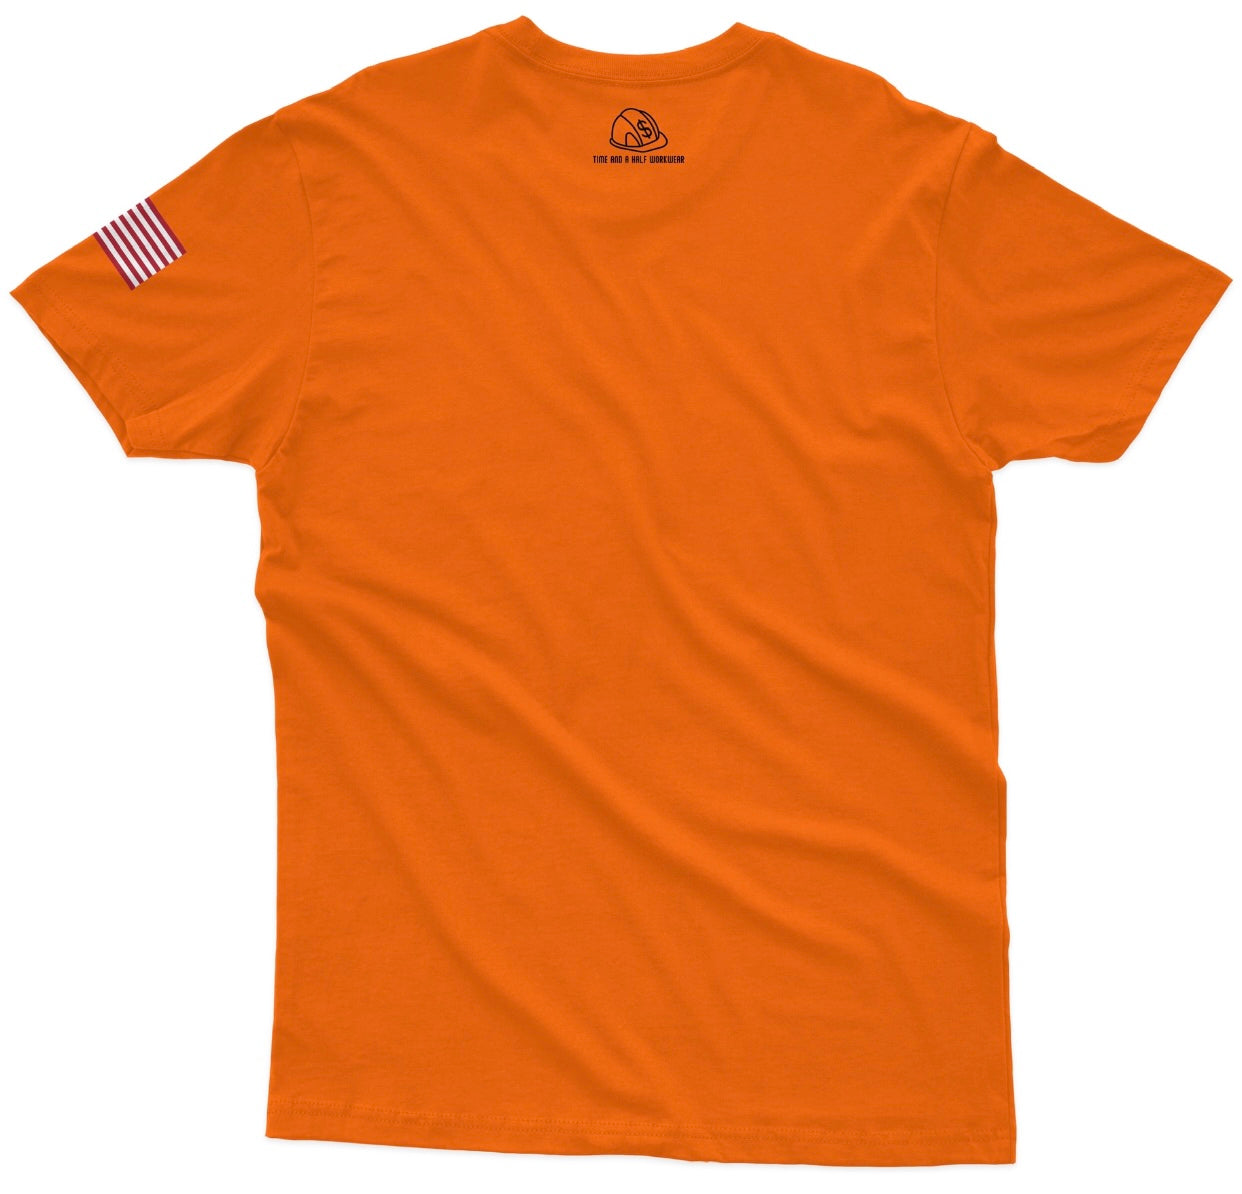 Cunty T-Shirt a Workwear in – Safety Half Orange Time and